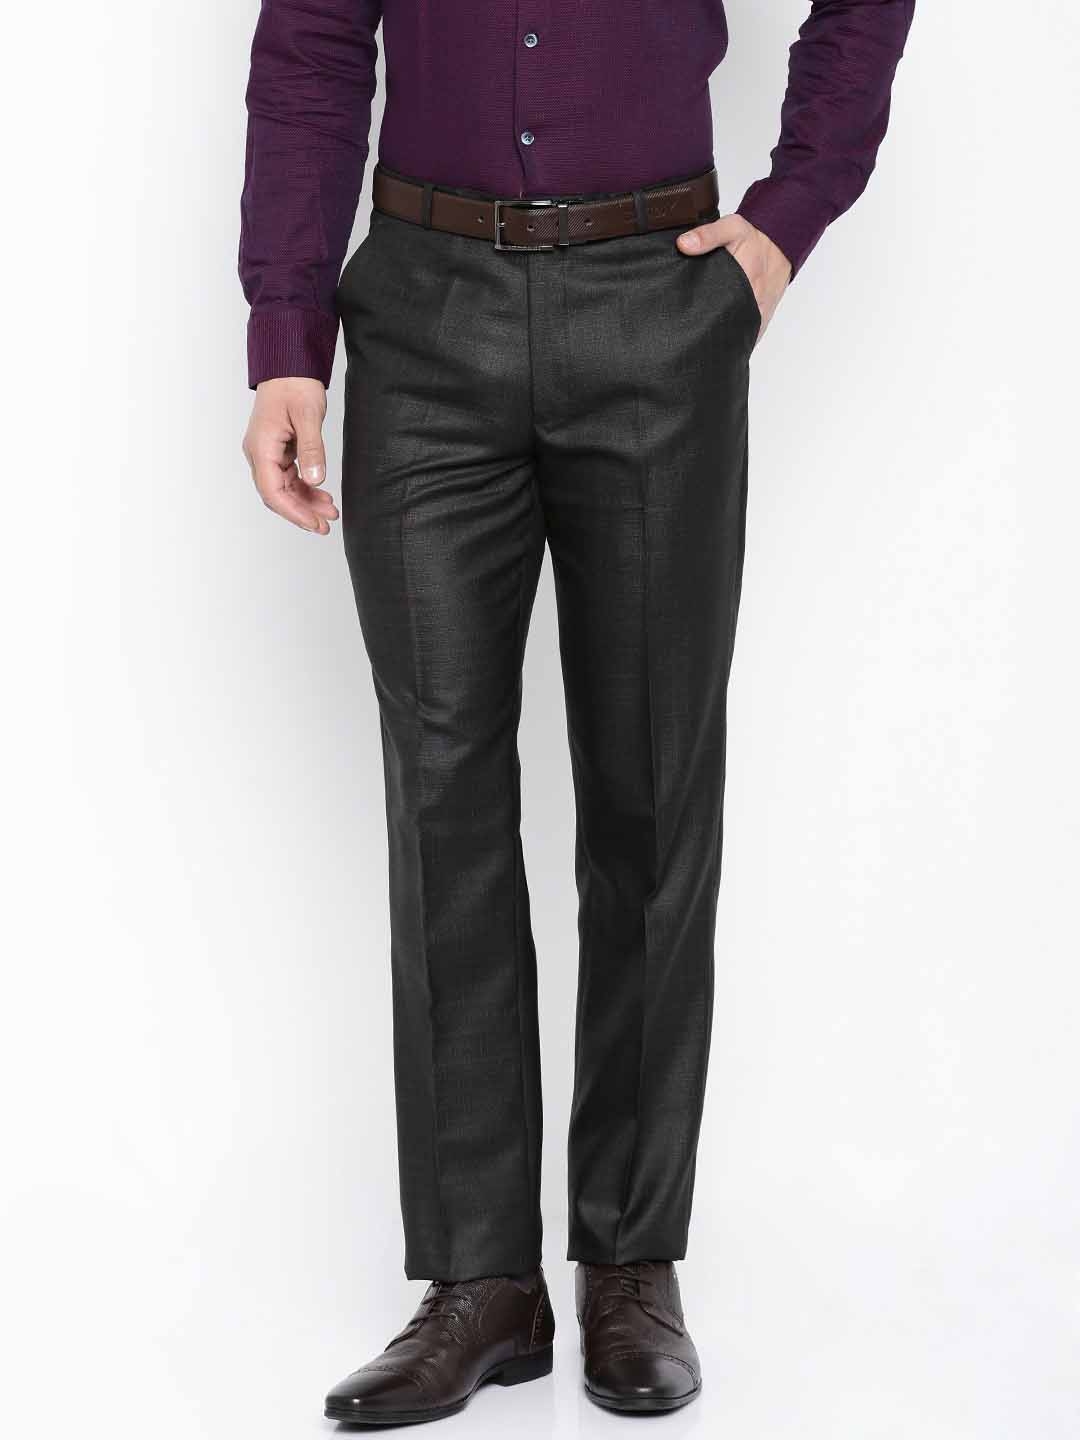 Buy Black Trousers & Pants for Men by INDEPENDENCE Online